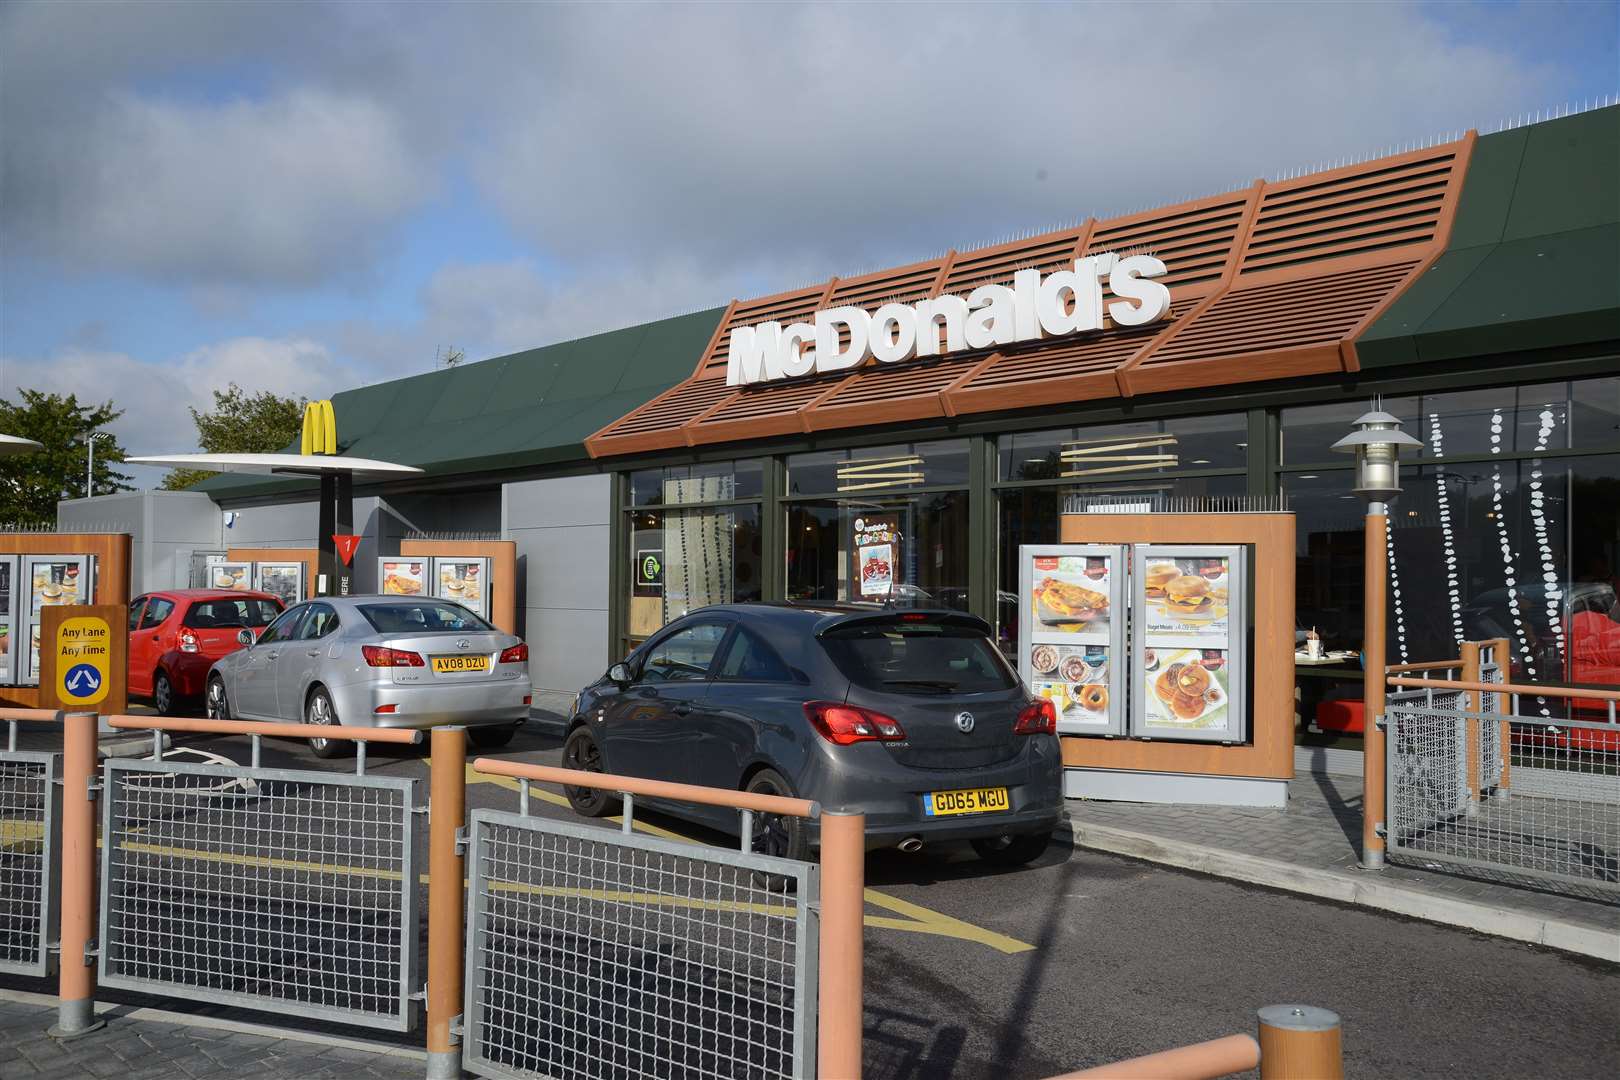 All of Ashford's McDonald's branches will be half price Mondays to Wednesdays